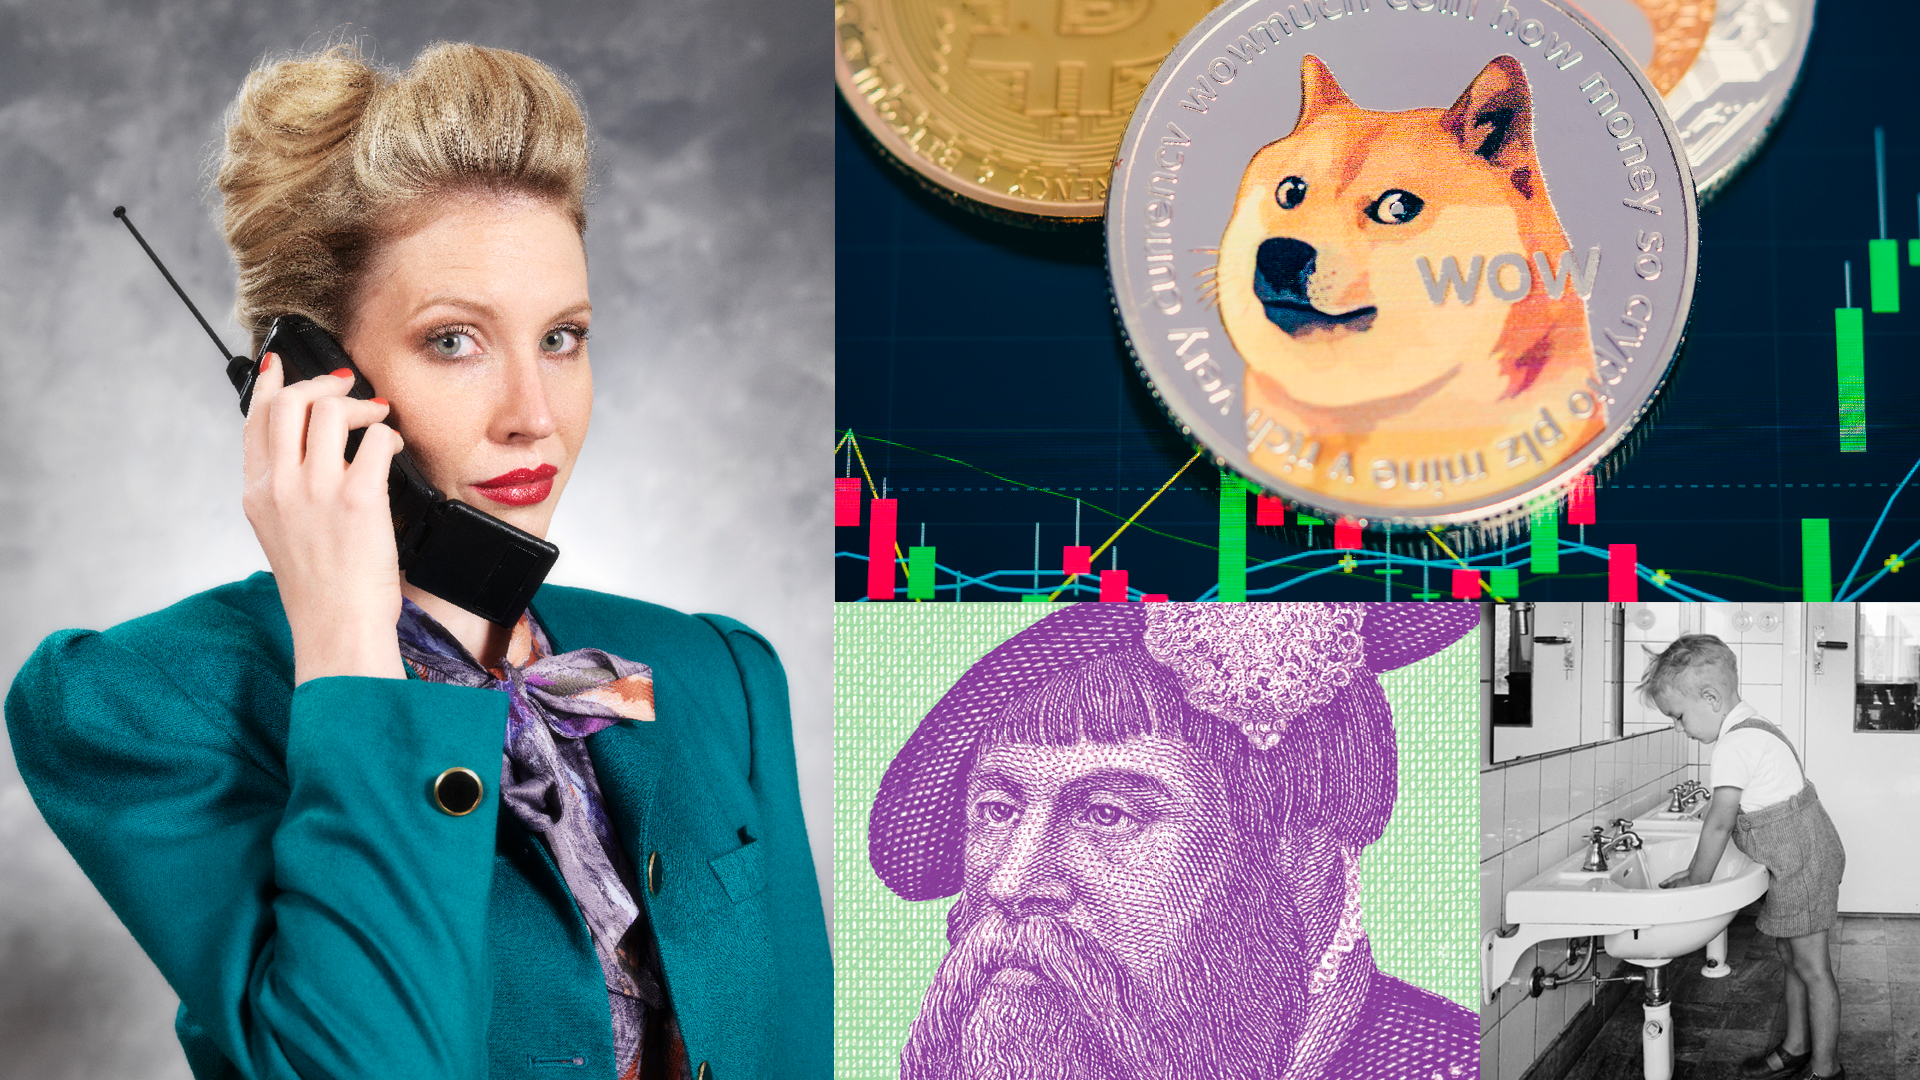 Collage with a yuppie, Gustav Vasa, crypto currency, and a black and white photo of a child